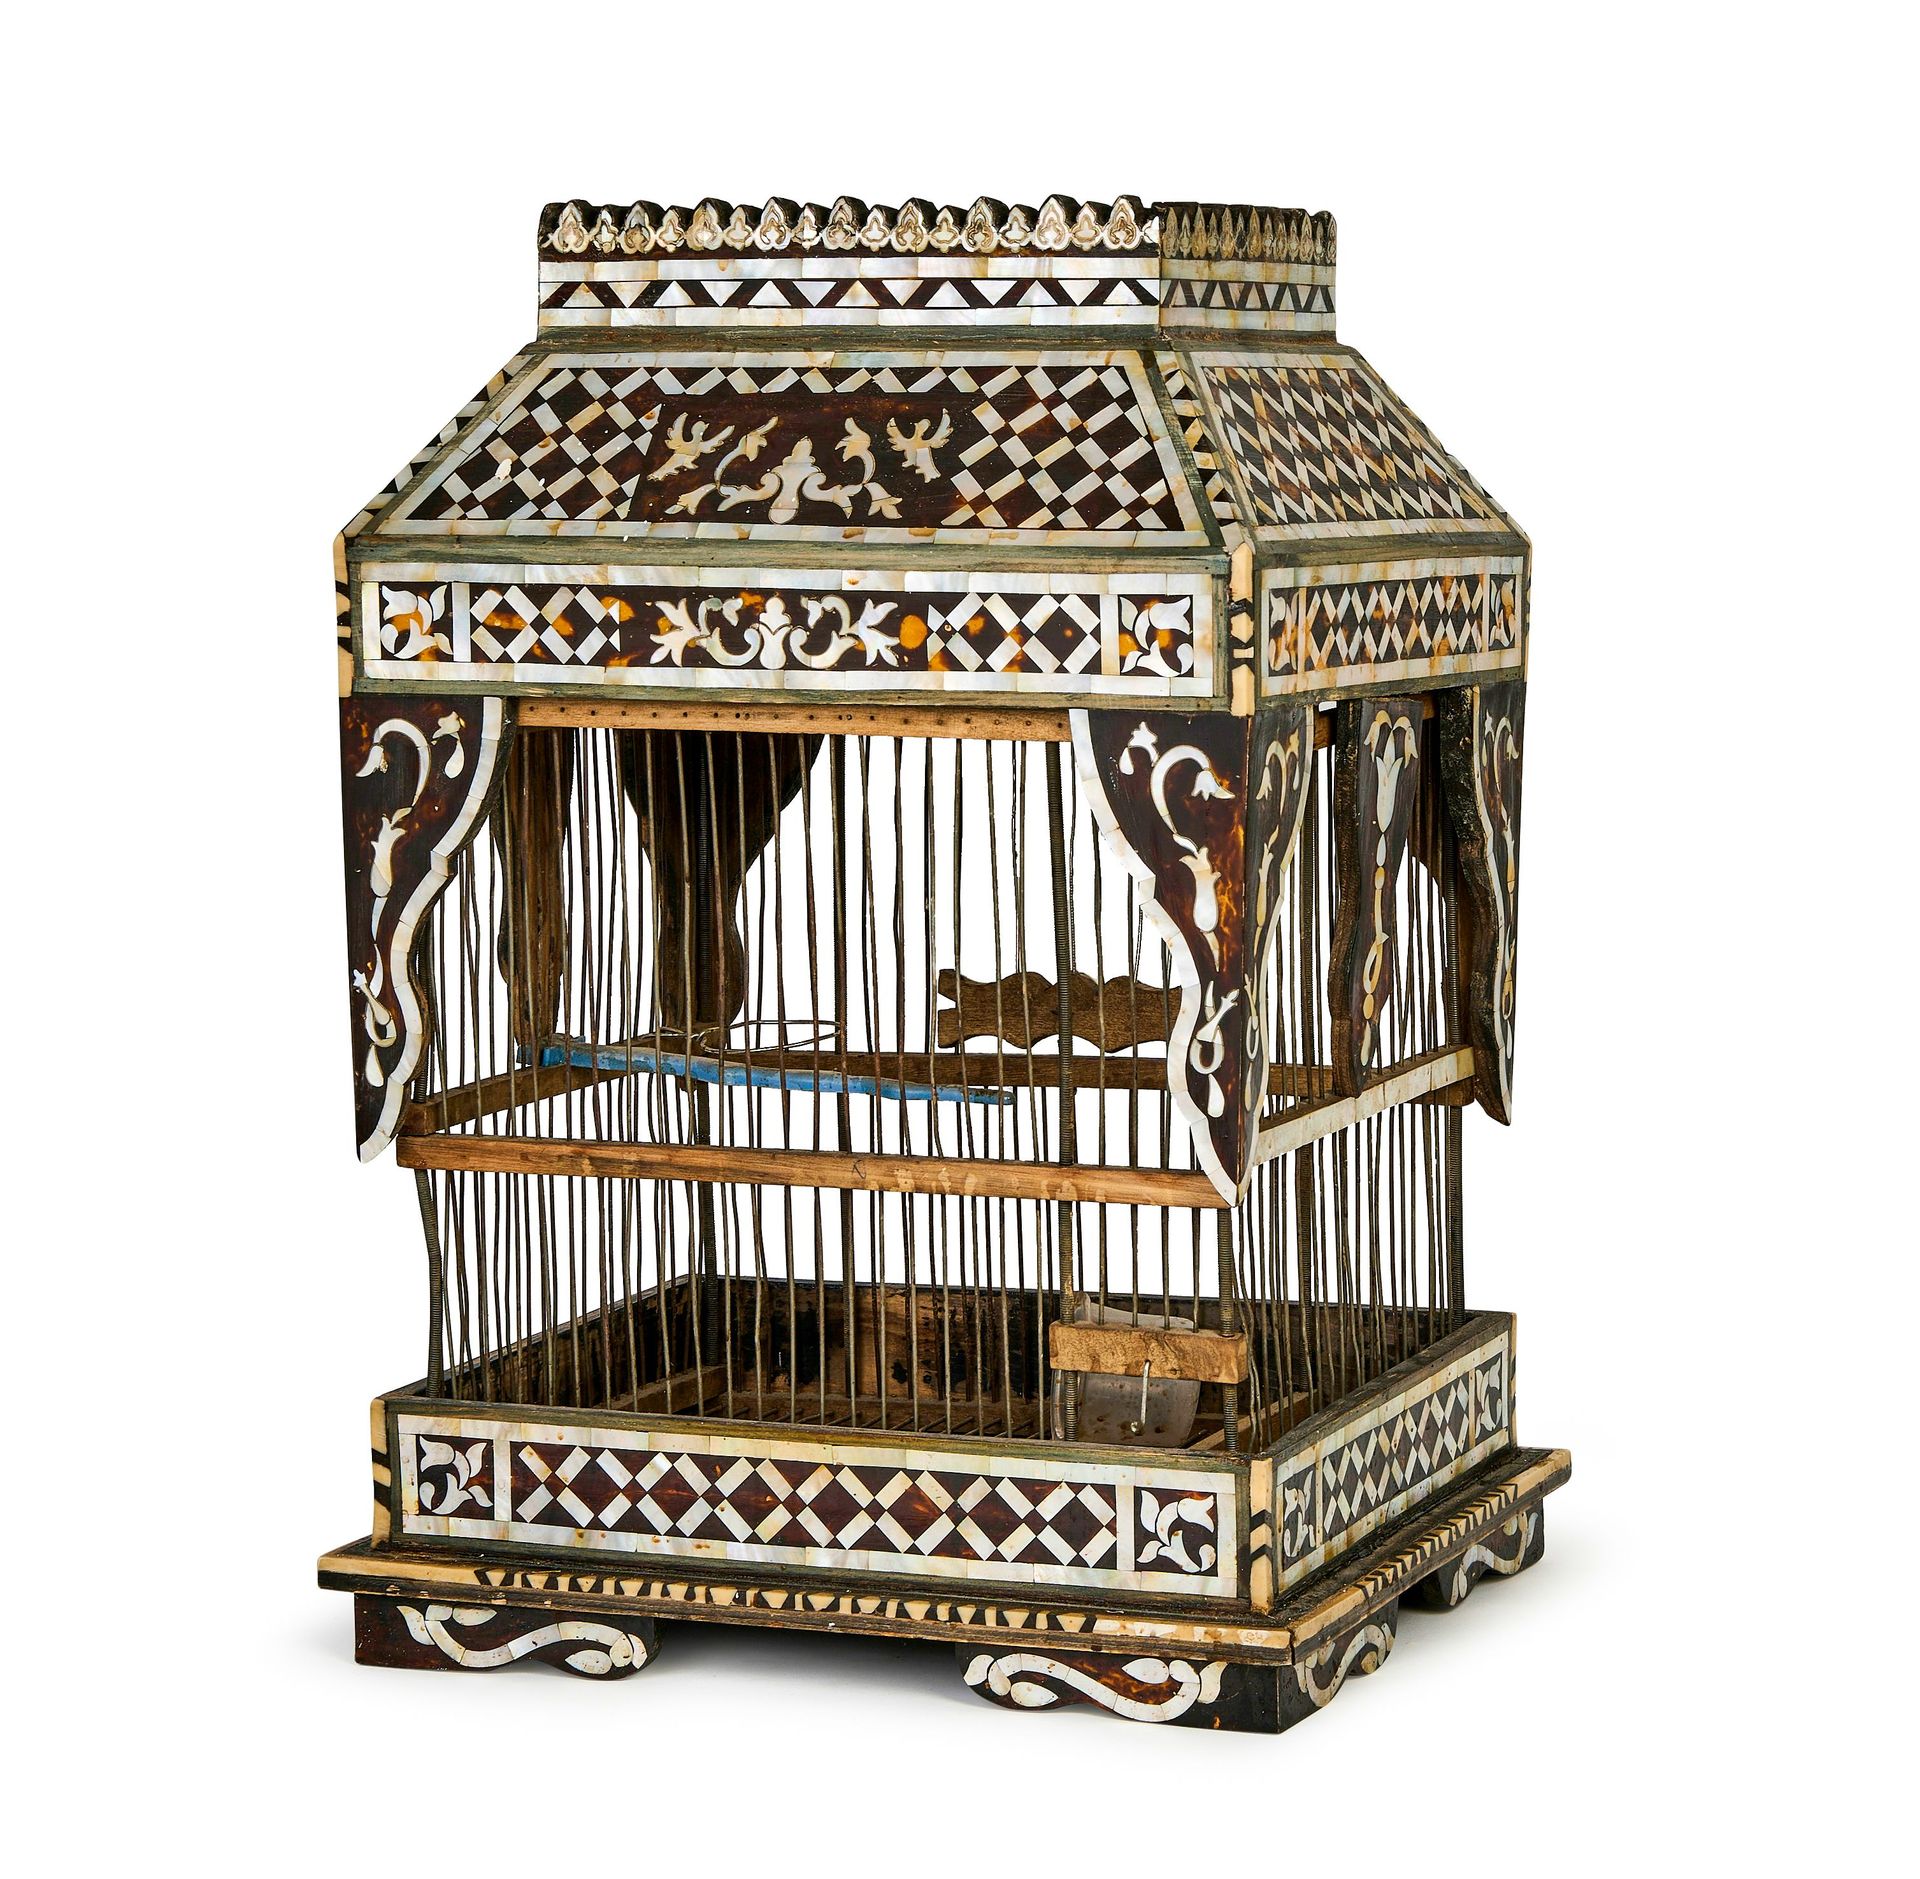 A LARGE MOTHER OF PEARL & TORTOISE SHELL INLAID BIRD CAGE, OTTOMAN, 19TH CENTURY&hellip;